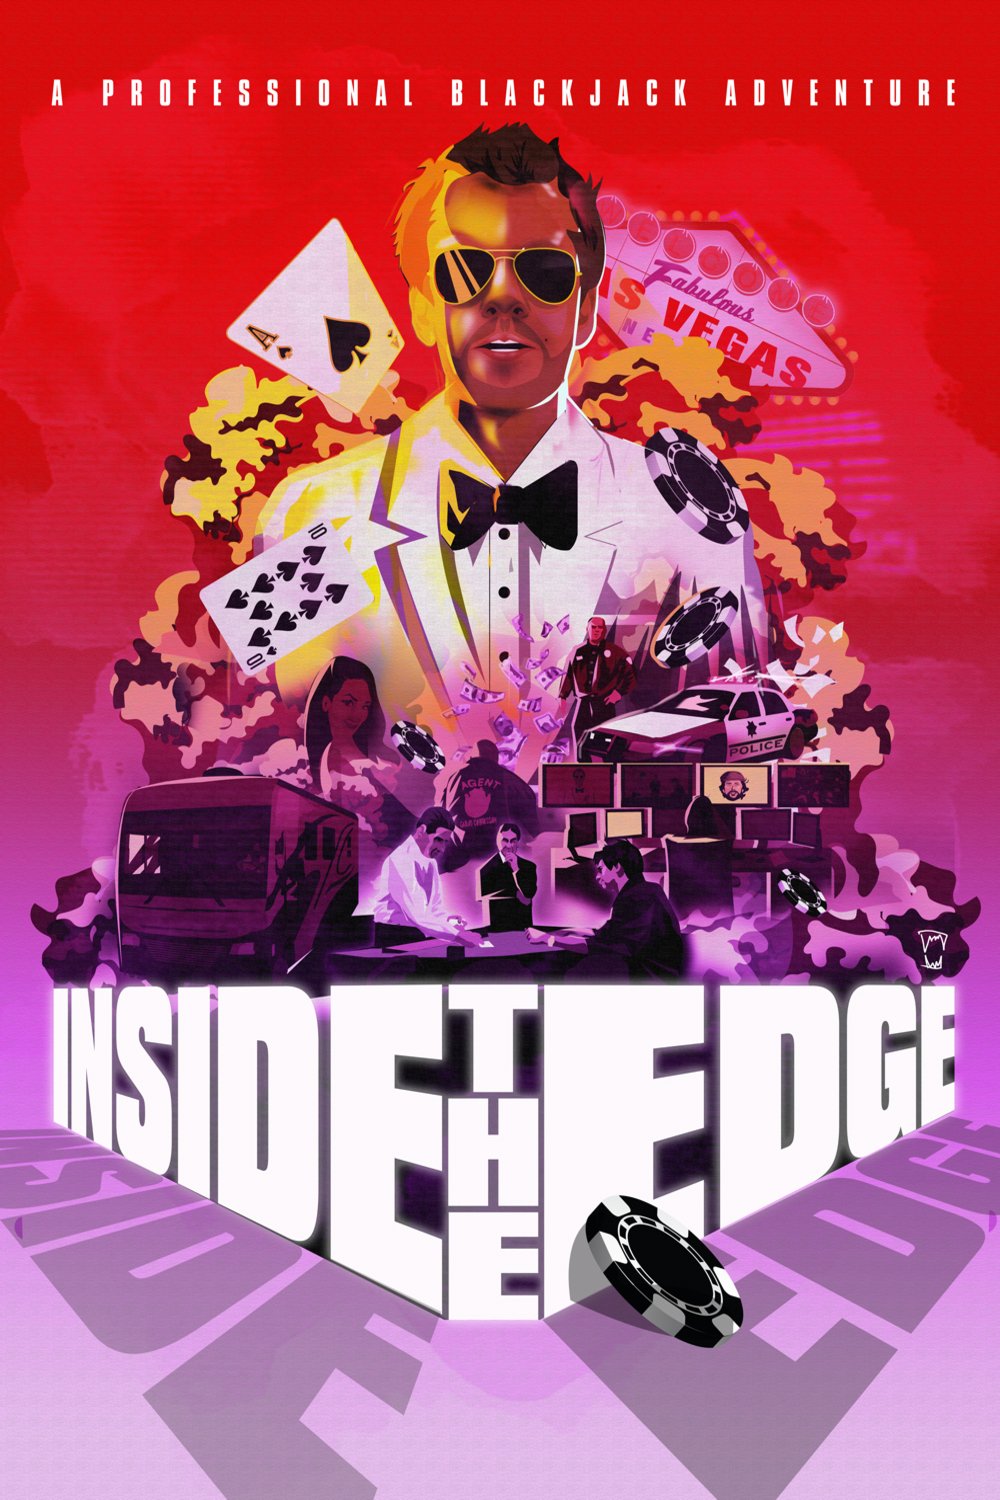 Poster of the movie Inside the Edge: A Professional Blackjack Adventure